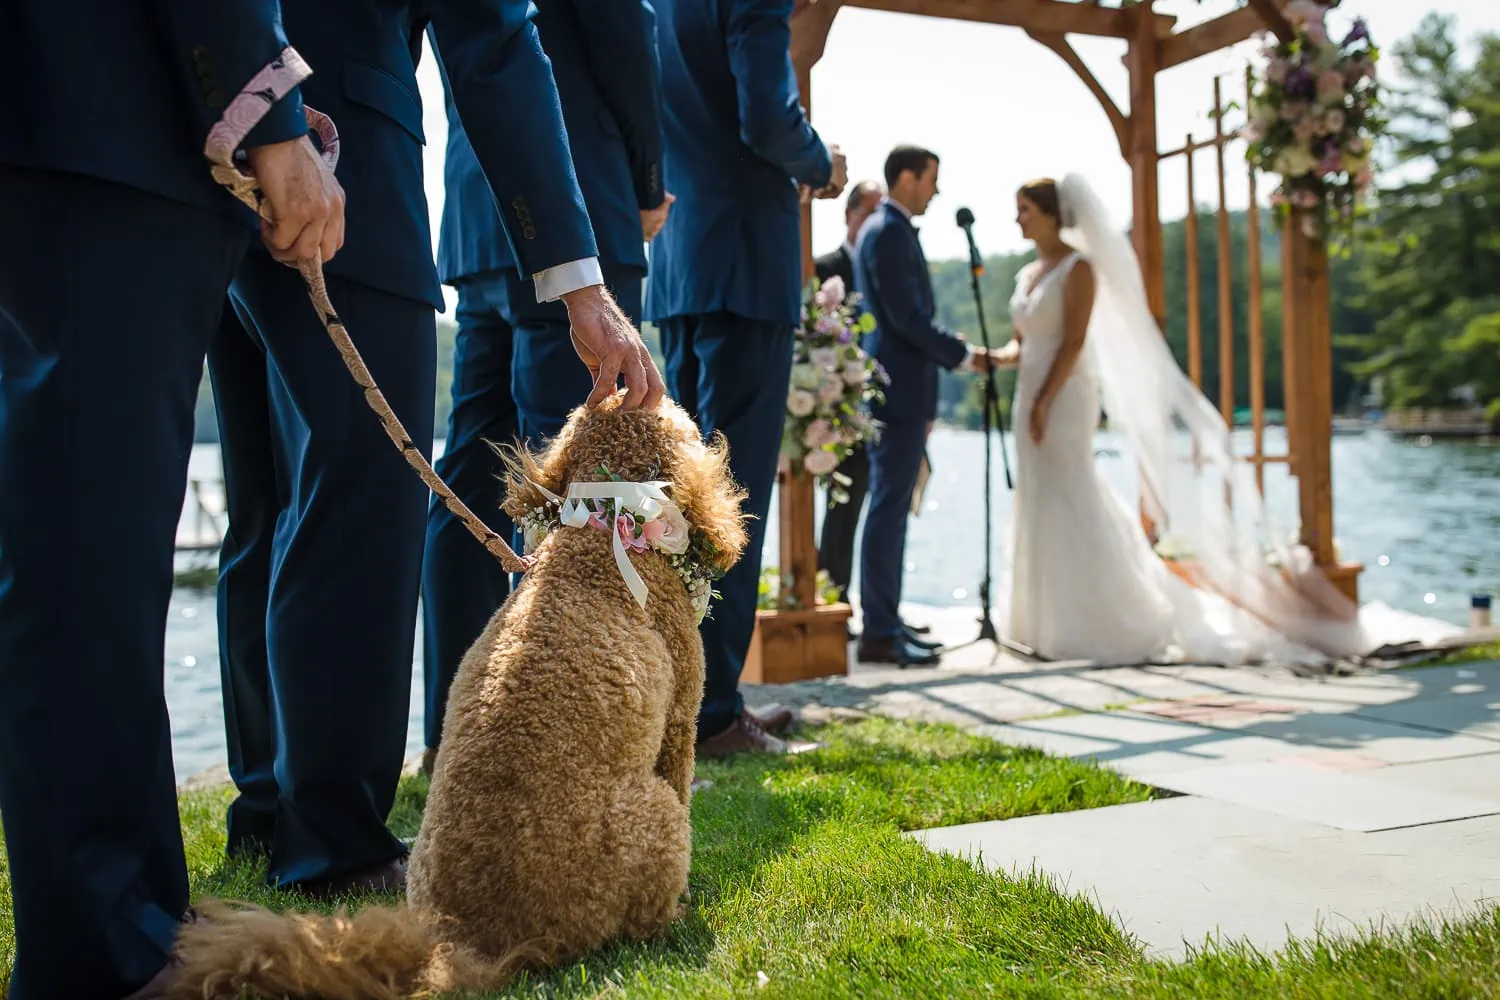 A hand holding a dogs leash with another hand scratching the dogs head as they watch a couple getting married in the background